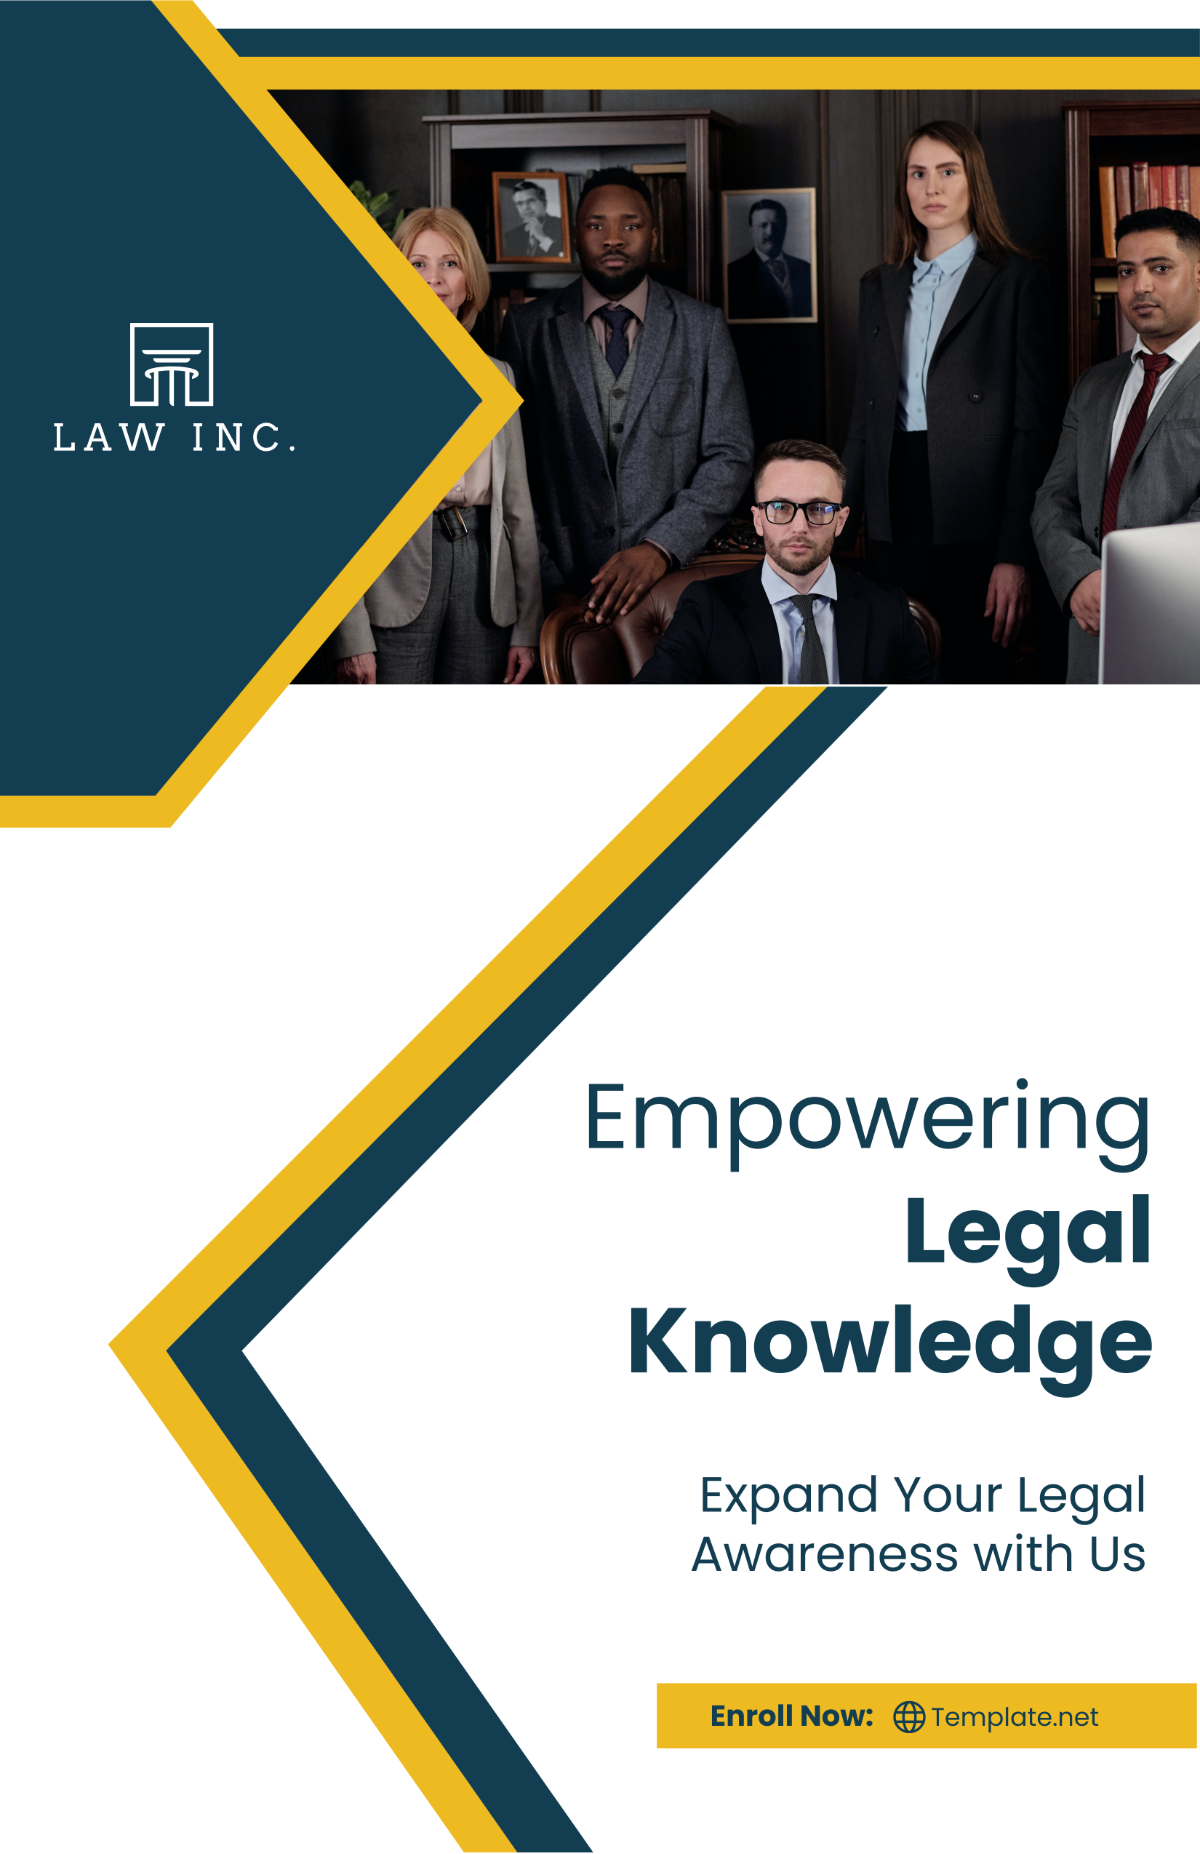 Law Firm Legal Awareness Poster